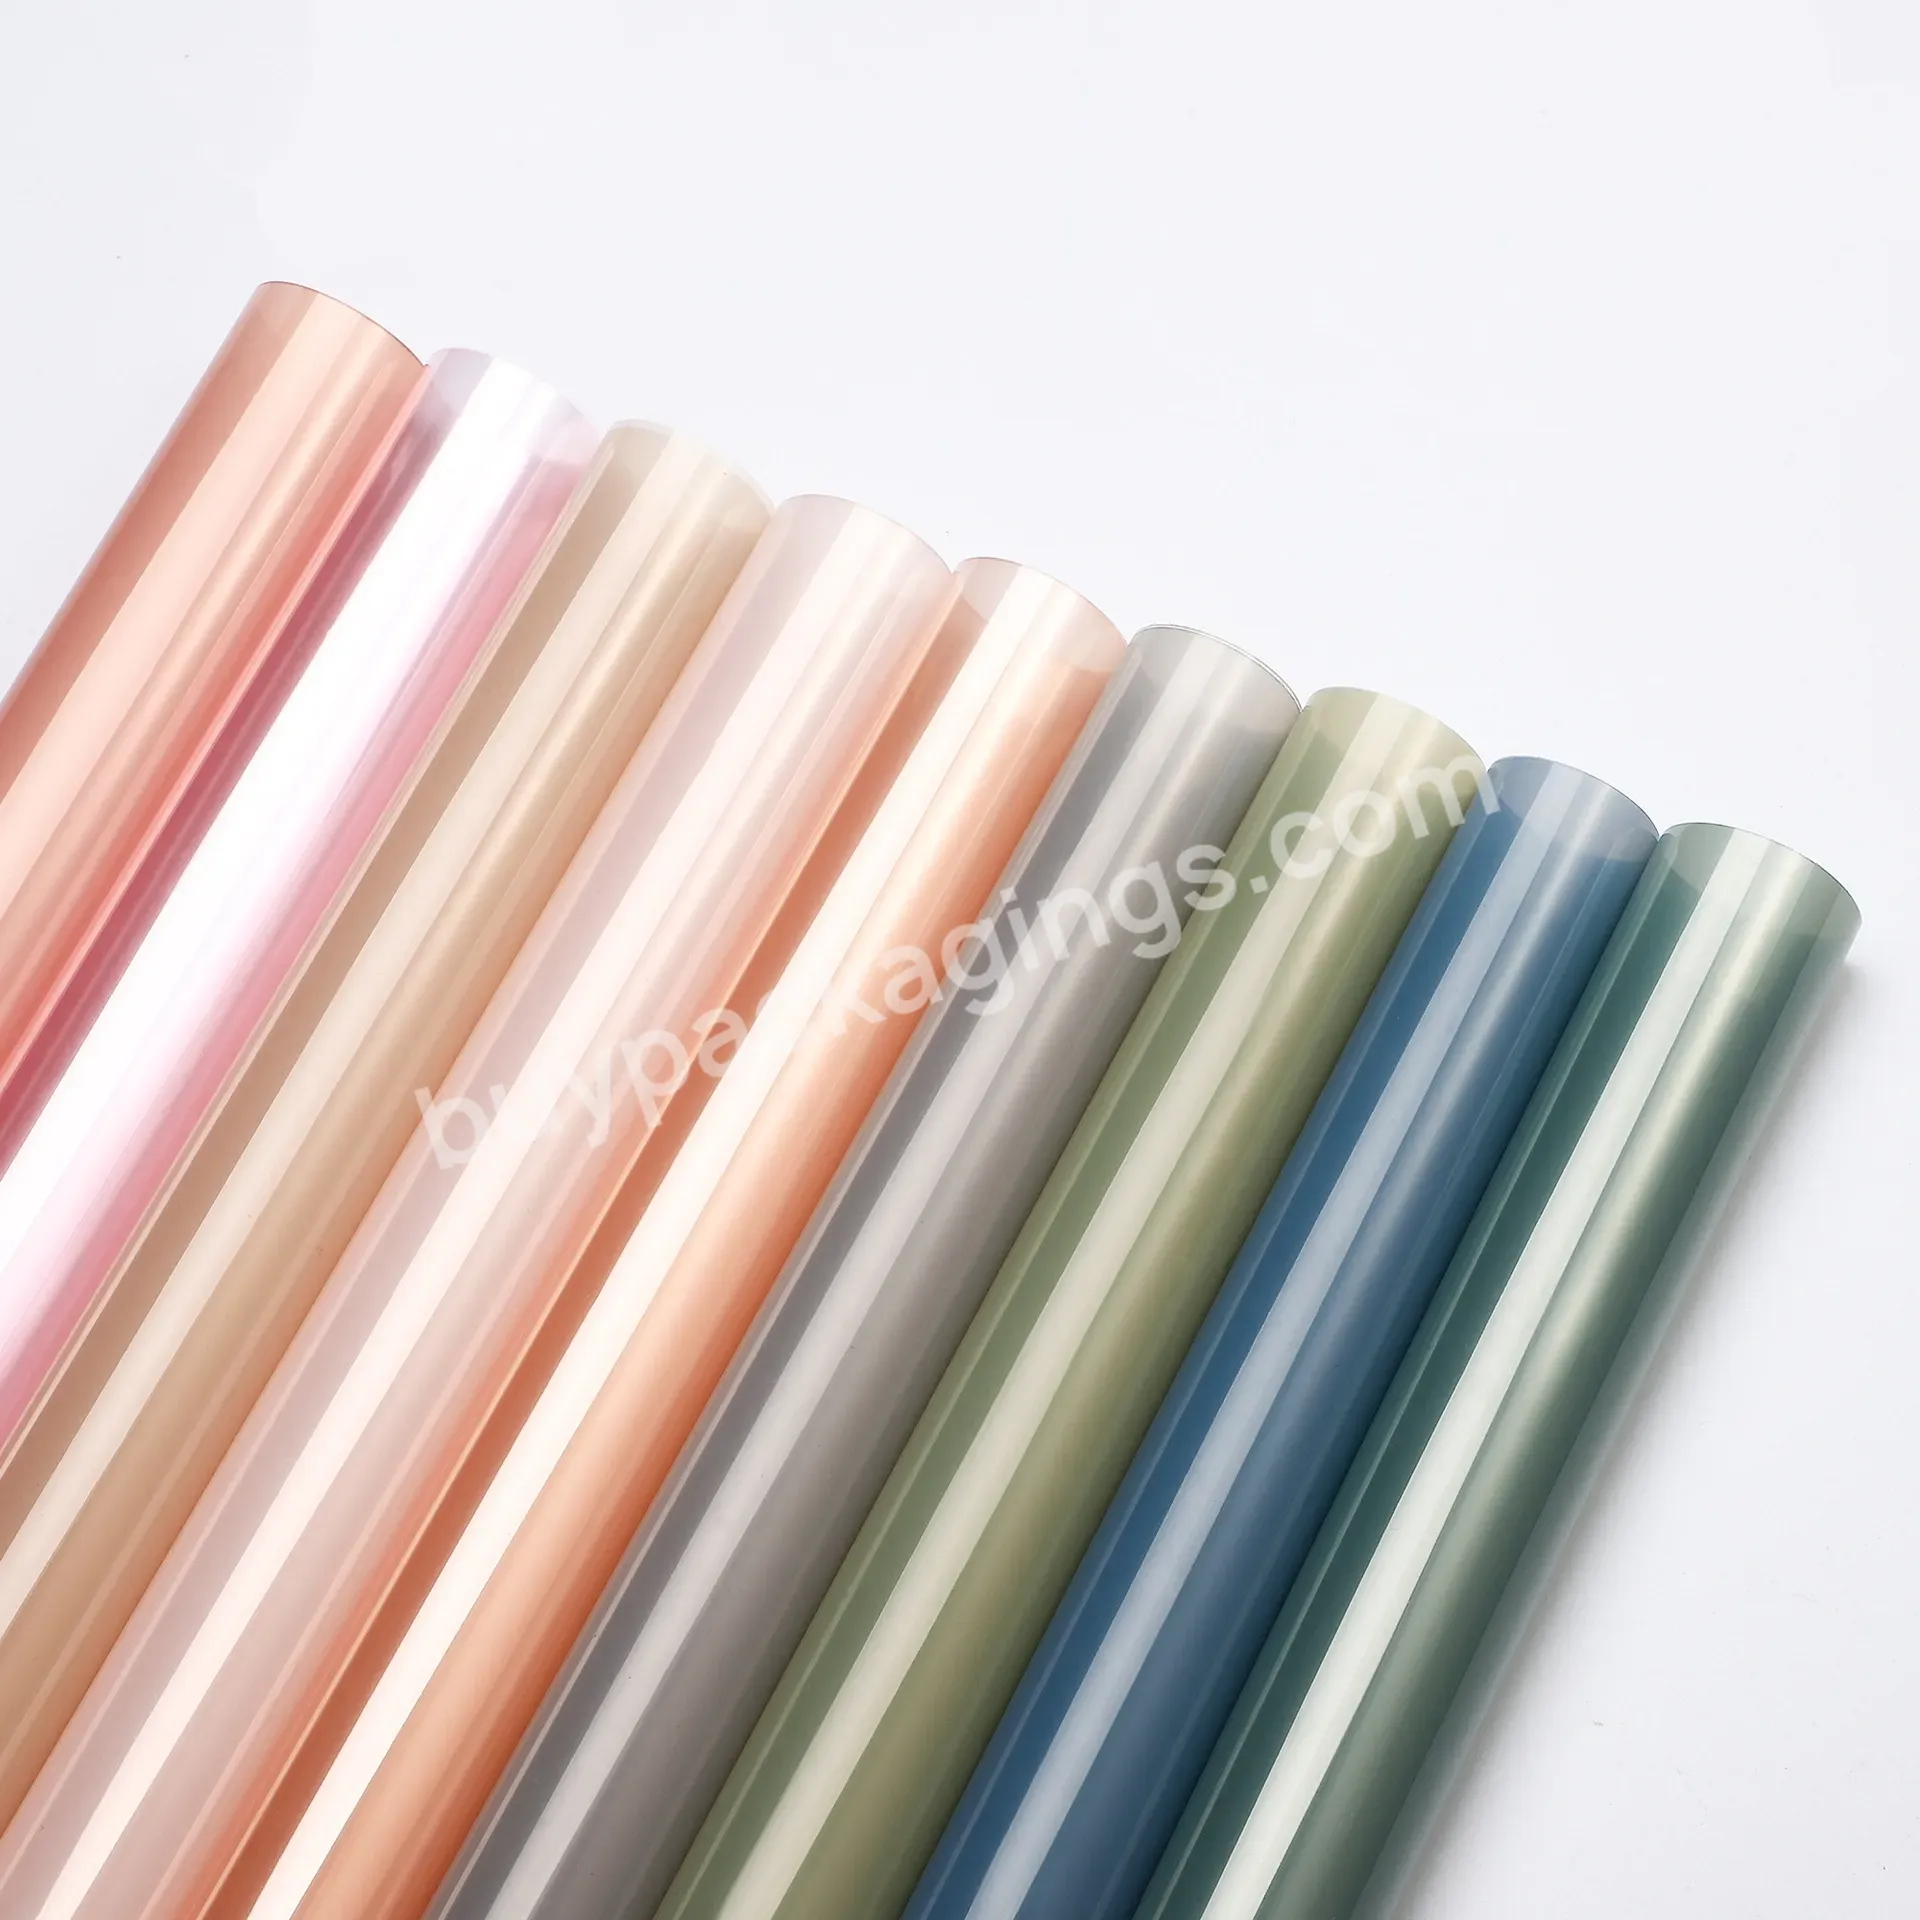 Factory Wholesale Flowers Wrapping Paper Color Cellophane Packaging Waterproof Material - Buy Fresh Flower Wrapping Paper,Coloured Cellophane Paper,Factory Wholesale Flowers Wrapping Paper Color Cellophane Packaging Waterproof Material.